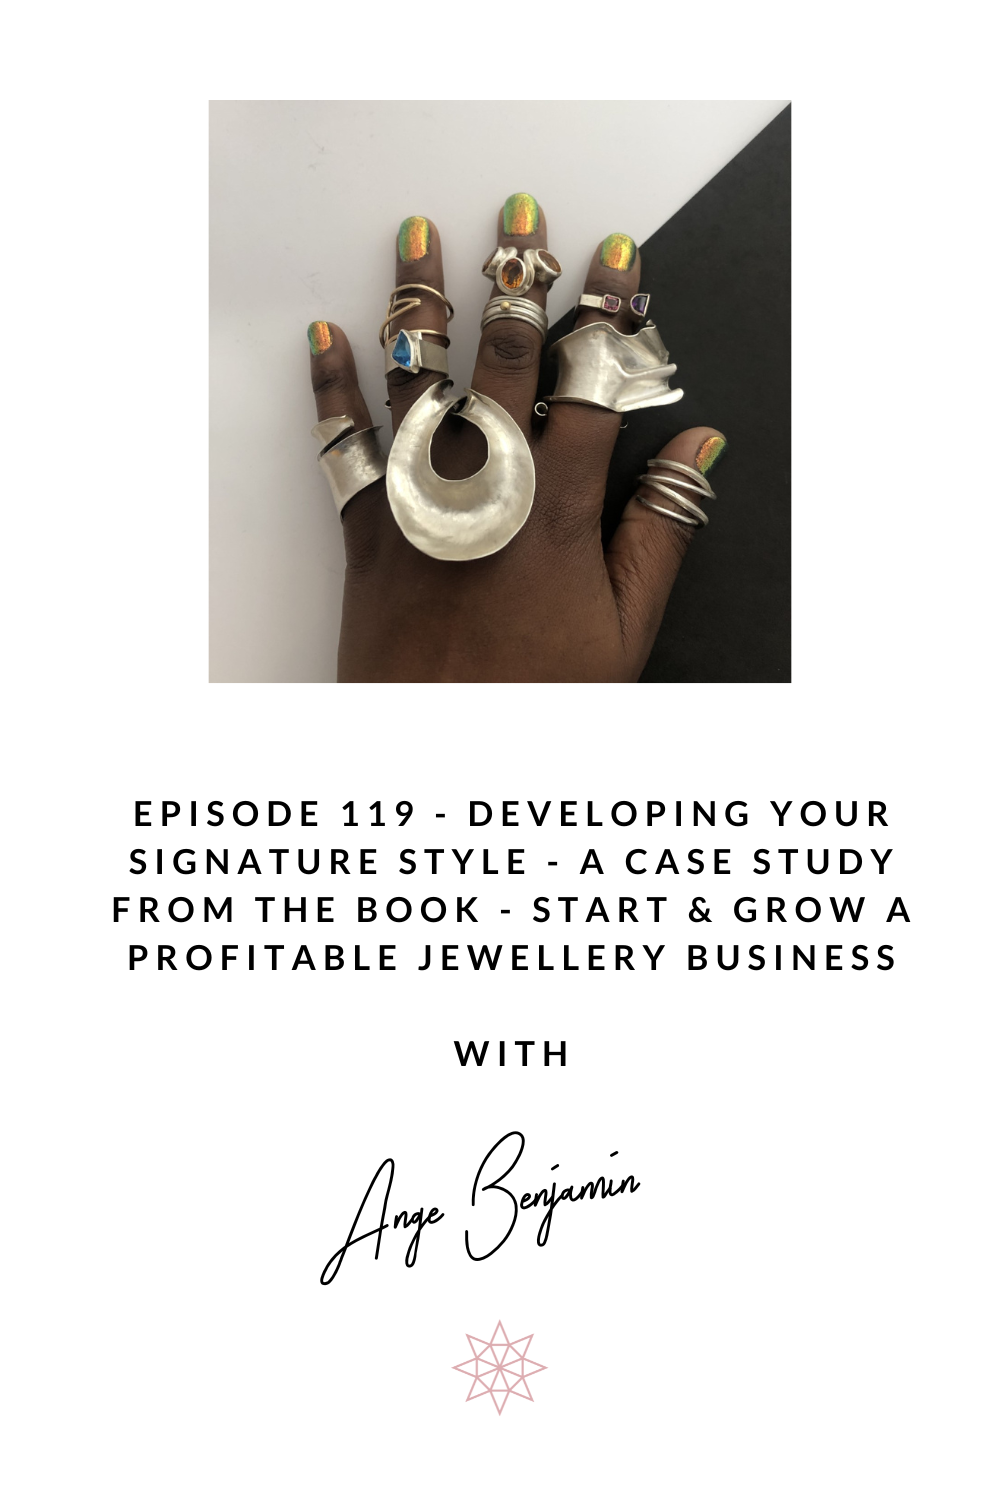 Why you should Develop your Signature Style